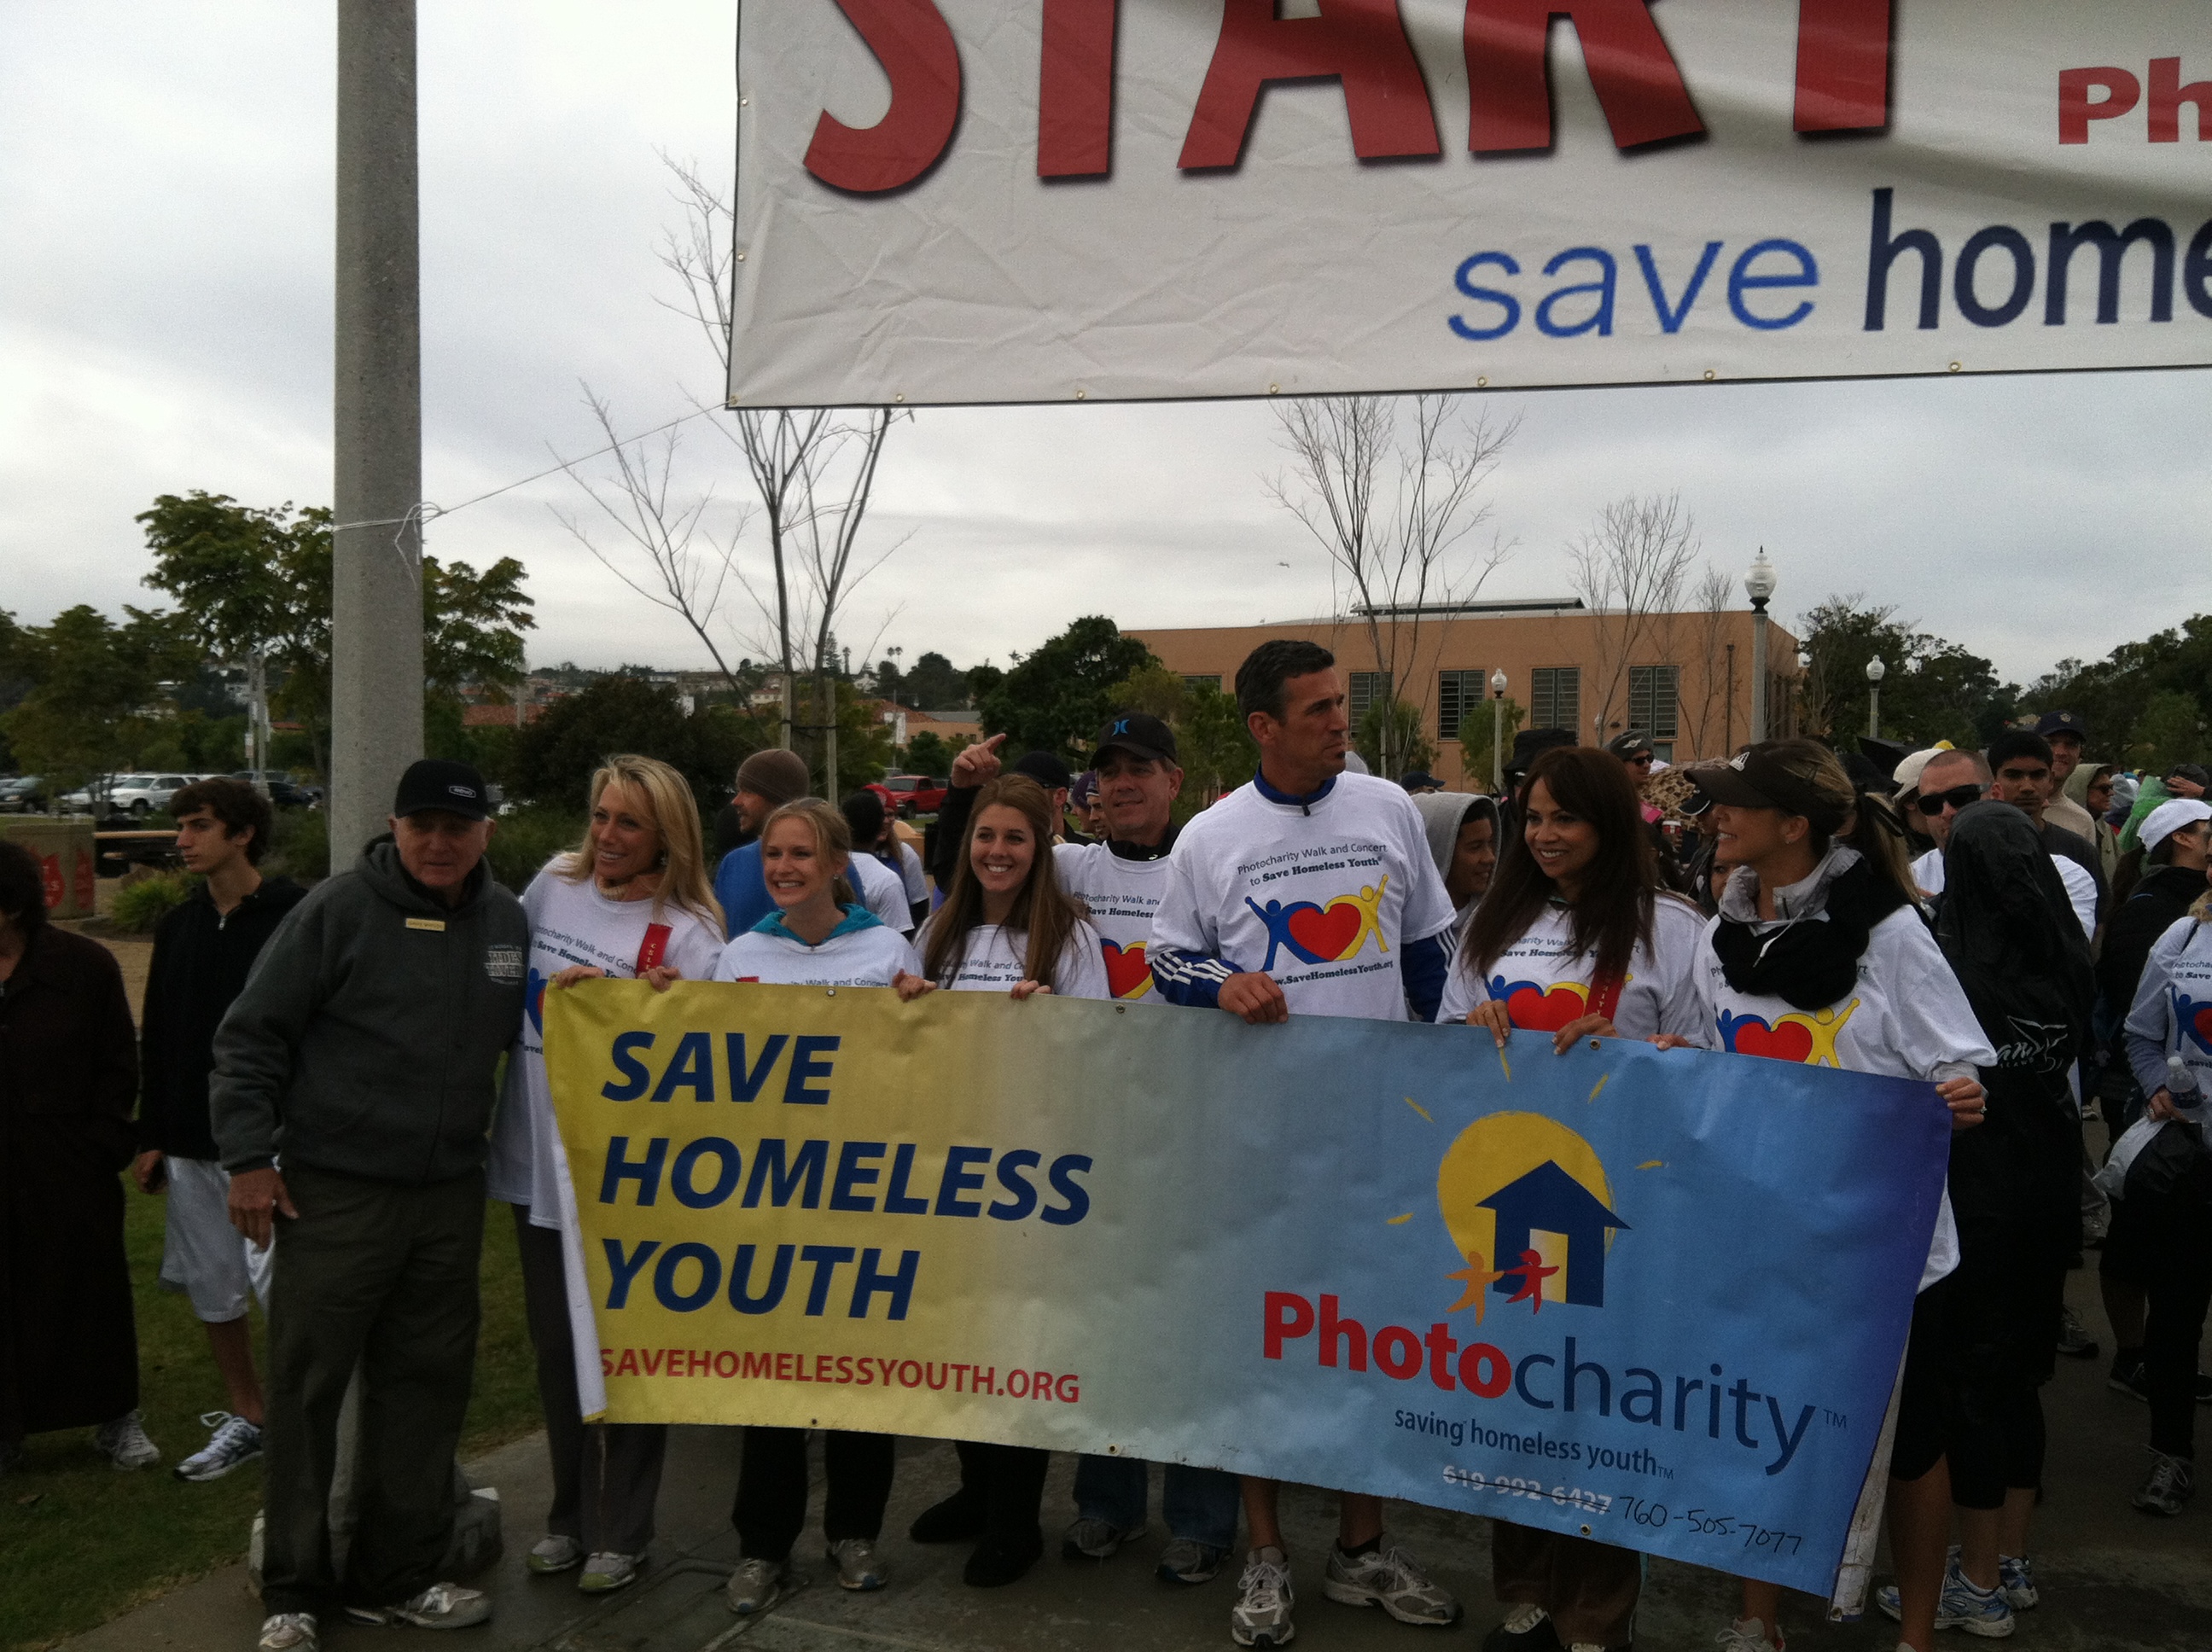 Photocharity Walk to Save Homeless Youth in San Diego